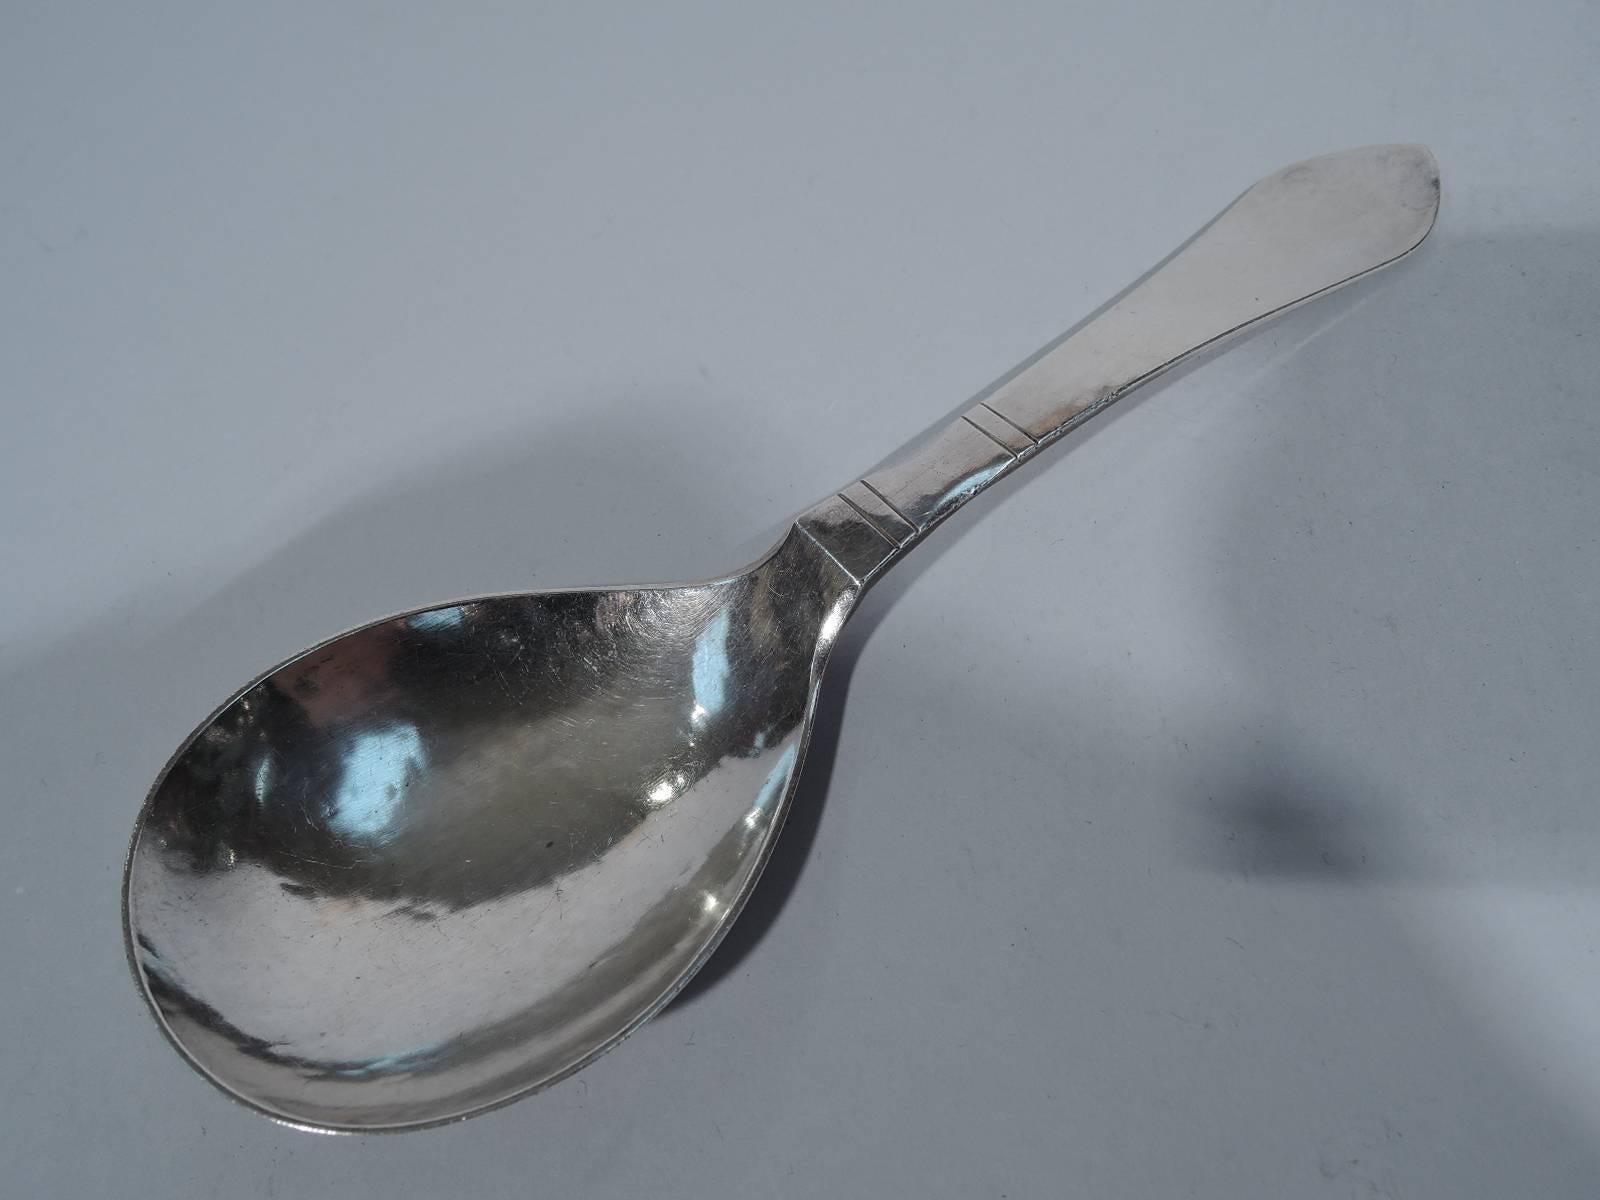 Hand-hammered sterling silver serving spoon in continental pattern. Made by Georg Jensen in Copenhagen. Shallow oval bowl and pointed terminal. Spare ornament in the form of incised horizontal bands. An early piece in this early pattern, which was